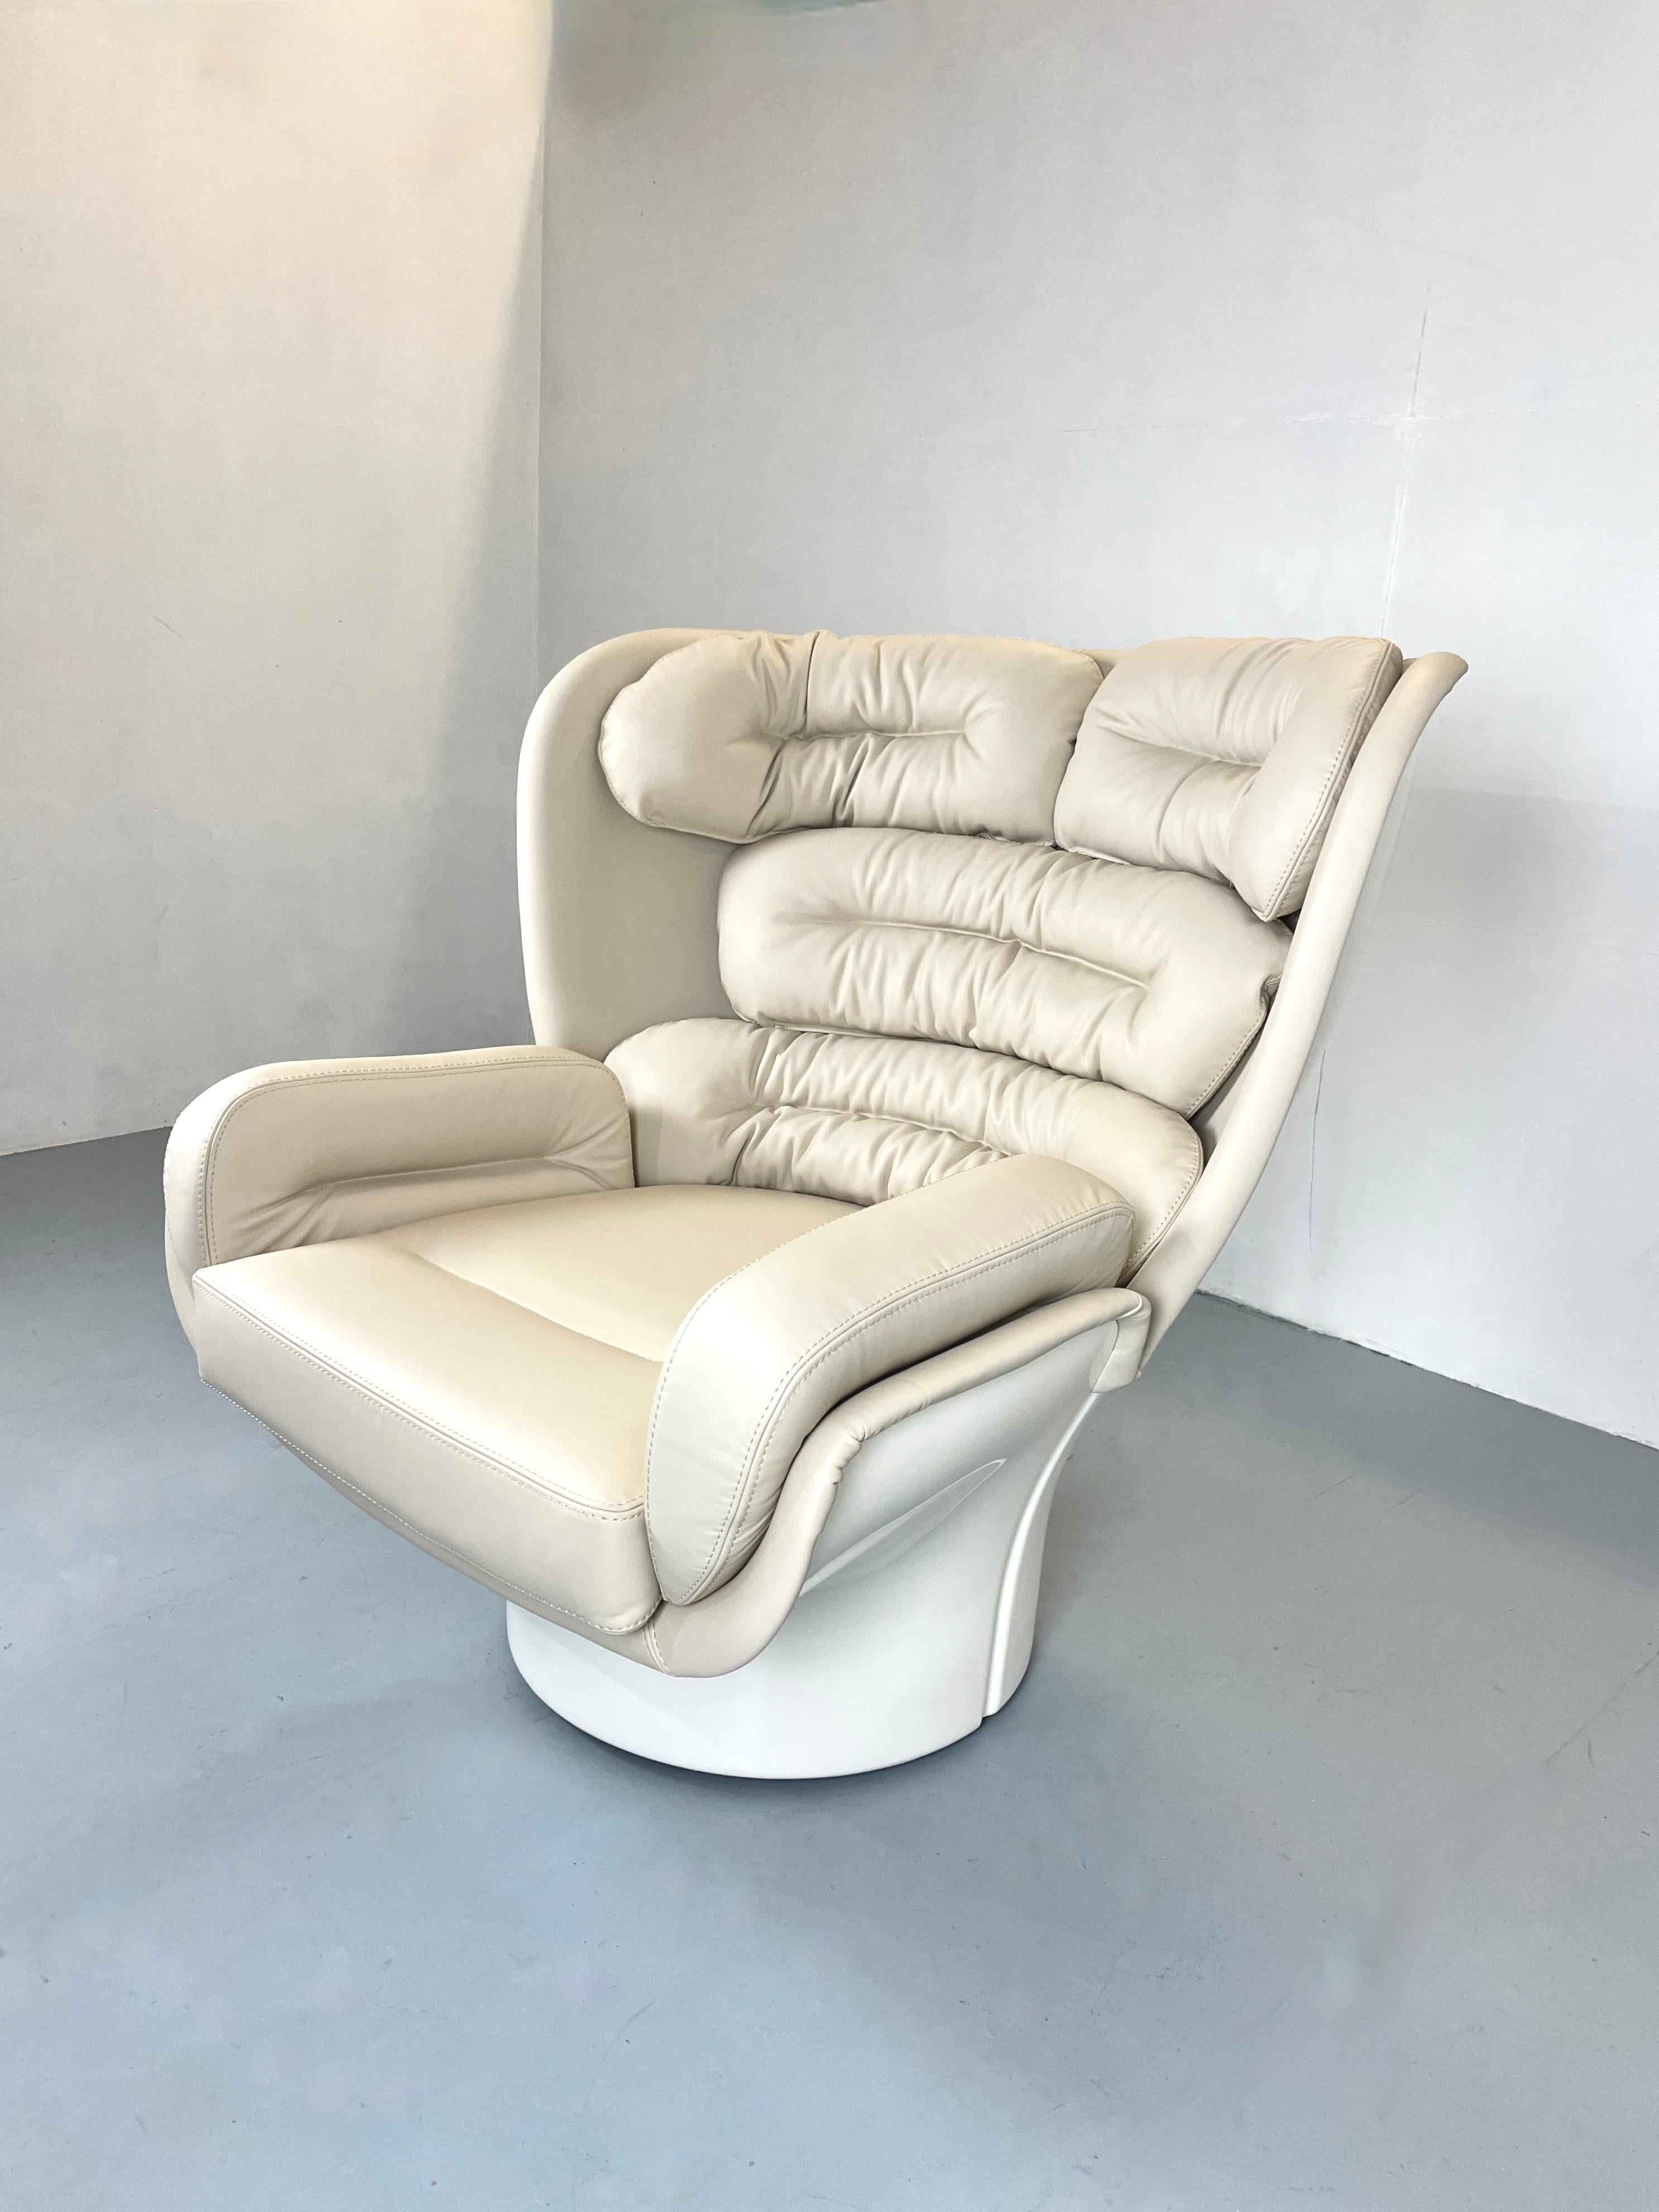 Italian NEW Elda Chair by Joe Colombo for Longhi, Italy  in white & taupe  For Sale